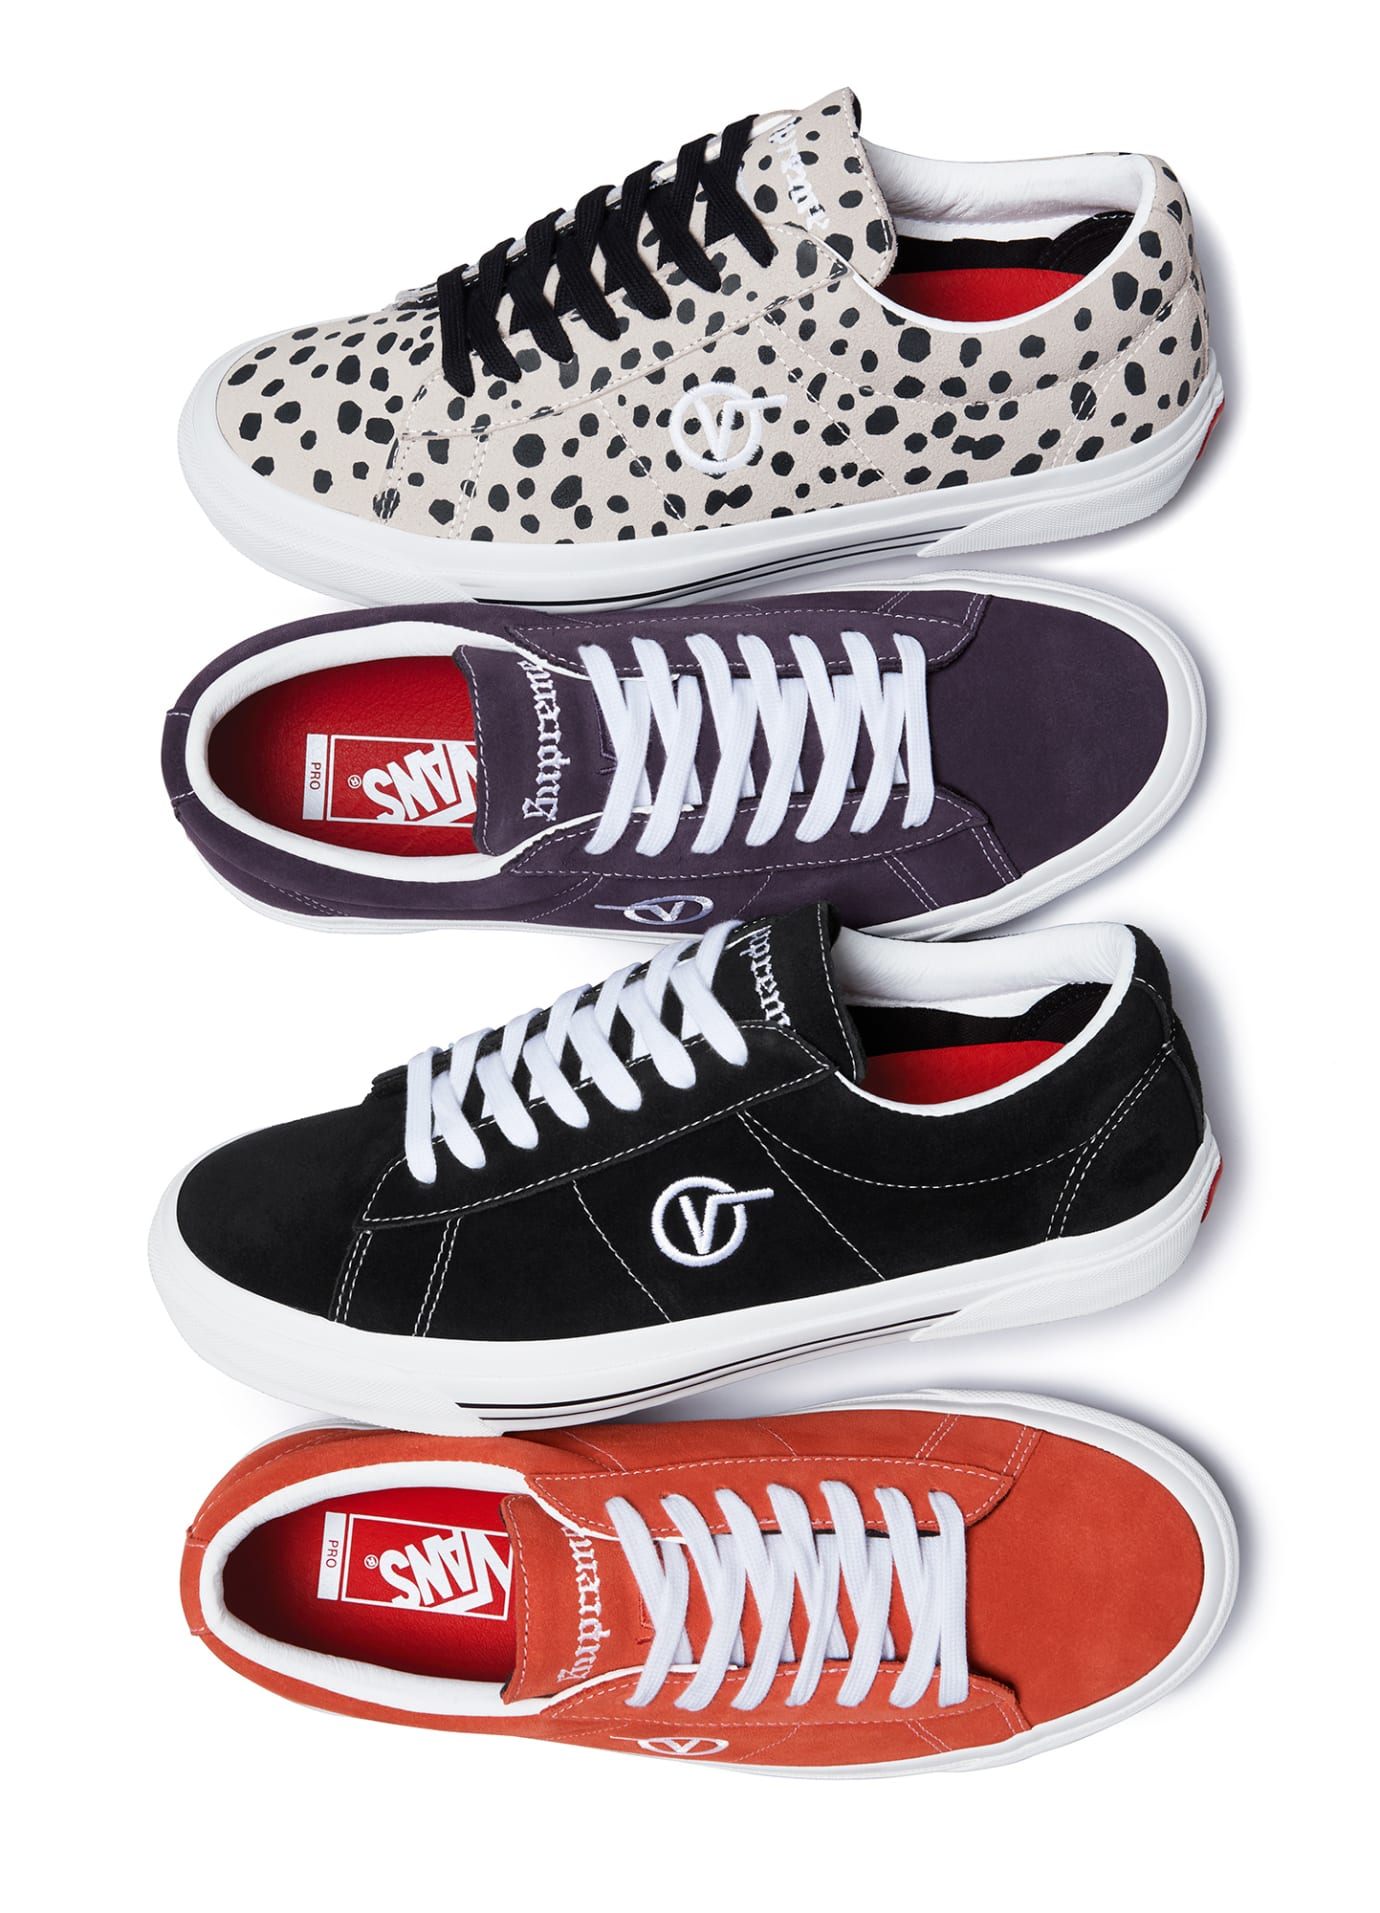 Nationwide Oriental bronze Supreme x Vans Sid Pro Collection Release Date | Sole Collector